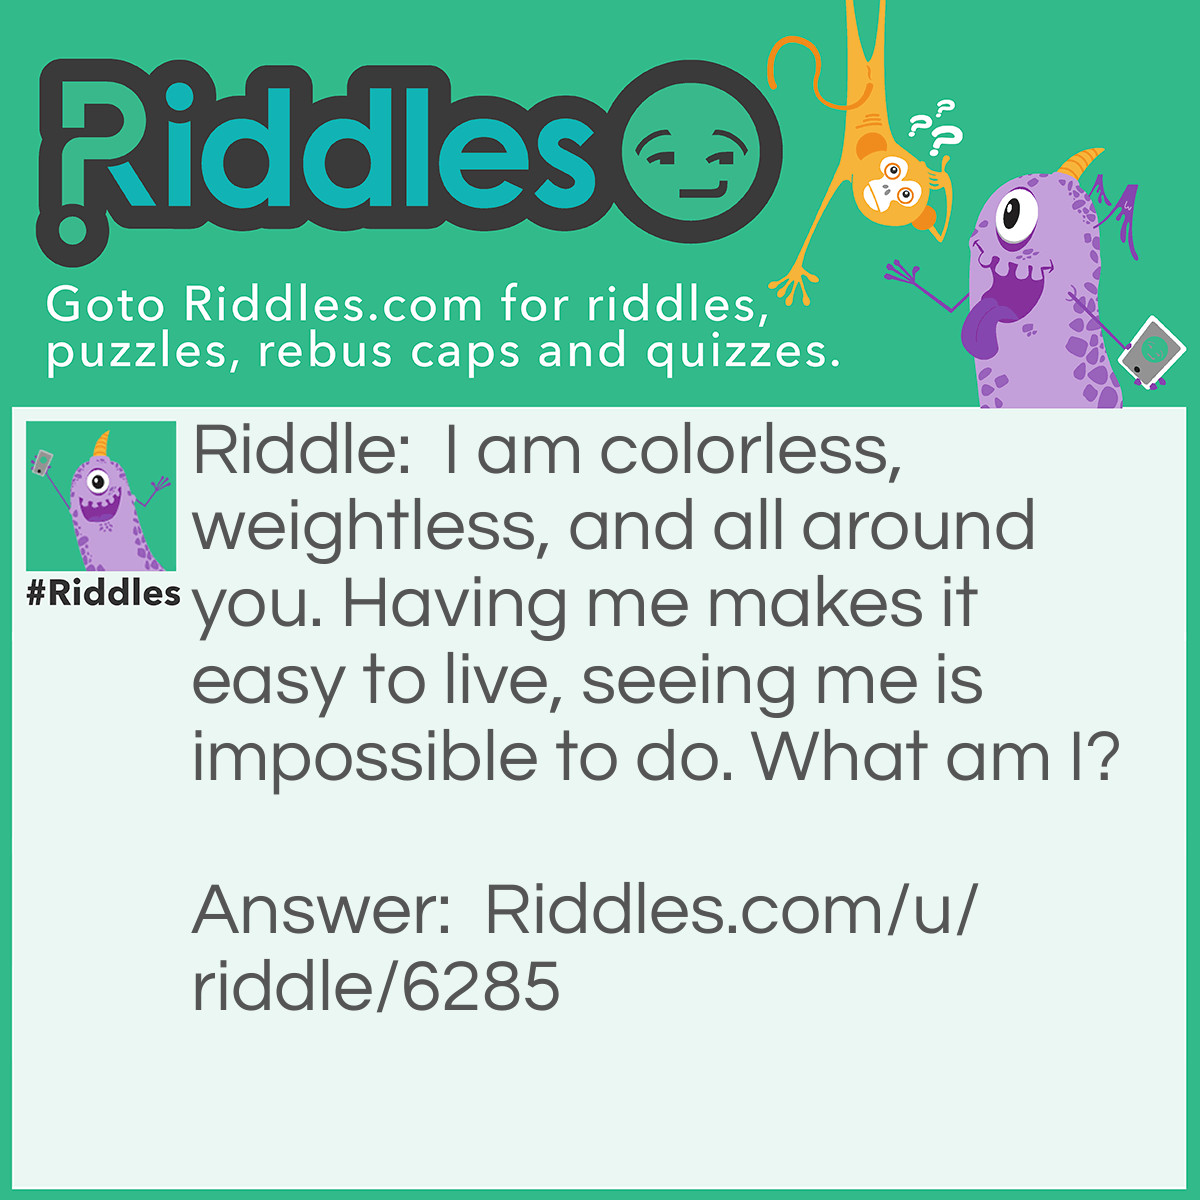 Riddle: I am colorless, weightless, and all around you. Having me makes it <a href="/easy-riddles">easy</a> to live, seeing me is impossible to do. What am I? Answer: Oxygen.